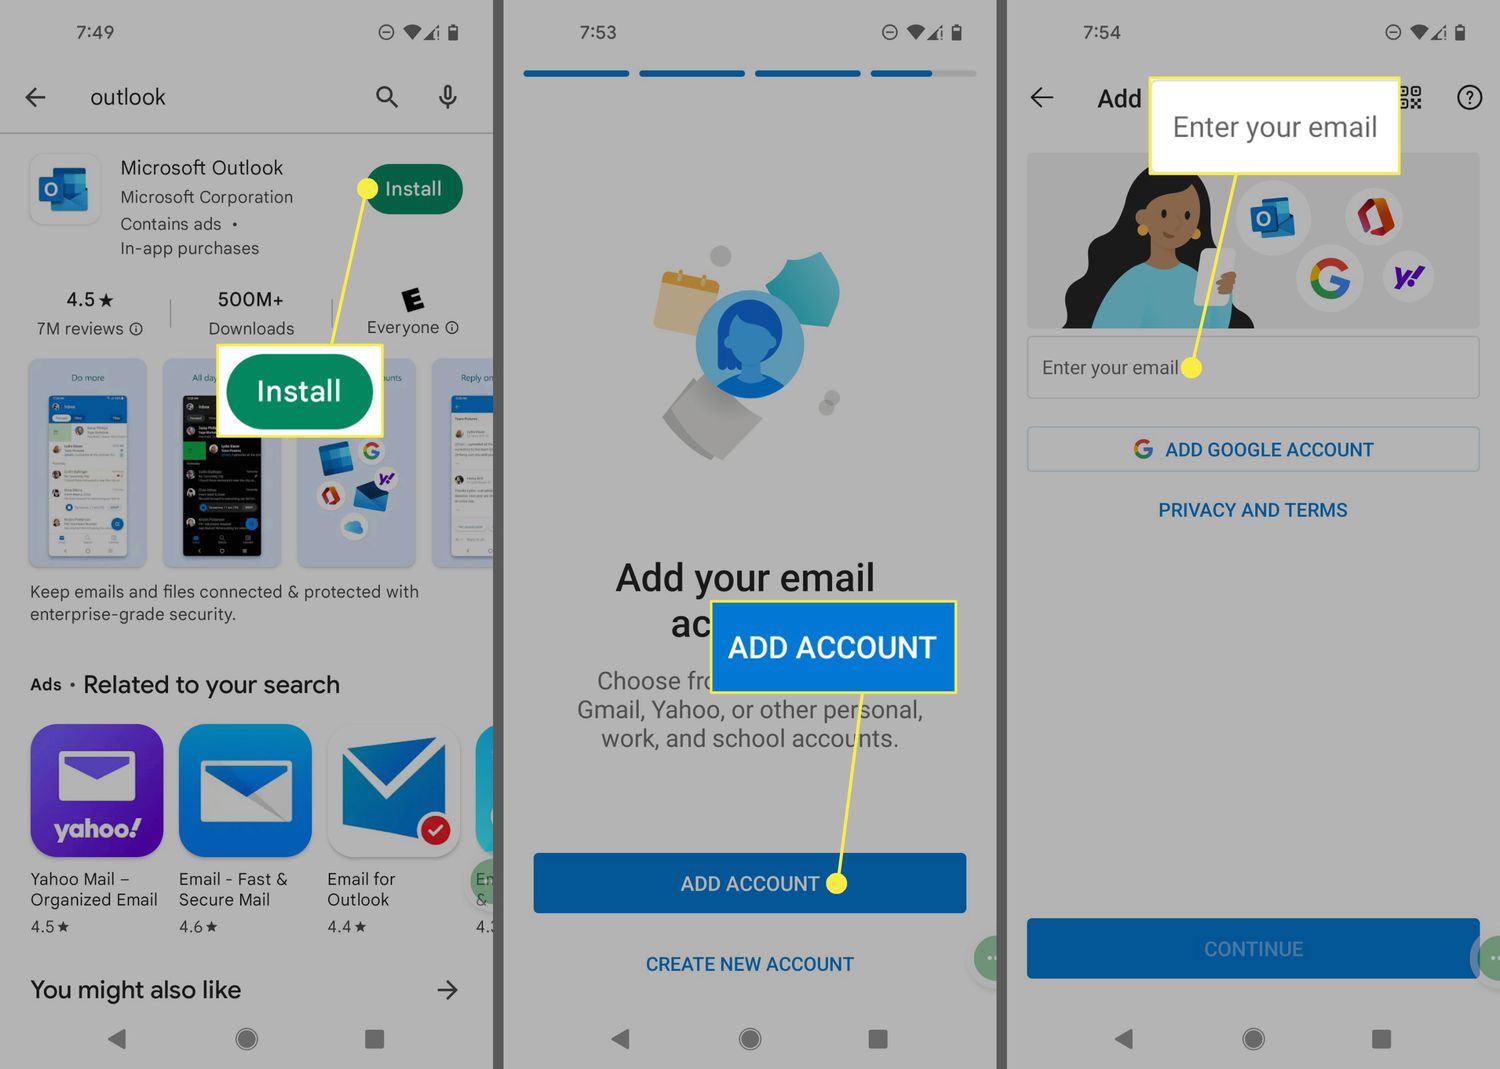 Install, Add Account, and Email your email in the Outlook app for Android